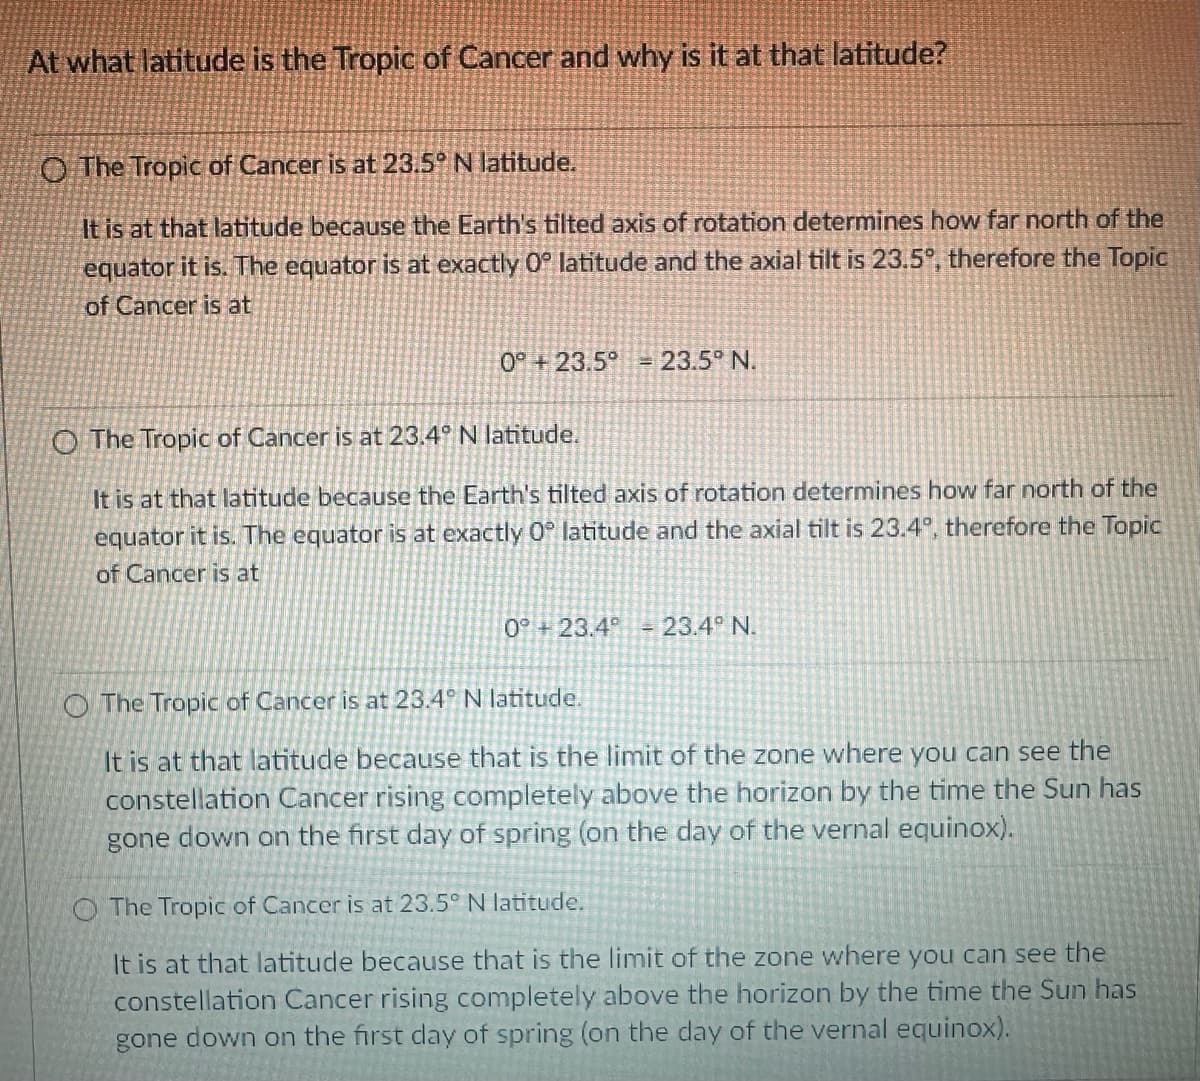 At what latitude is the Tropic of Cancer and why is it at that latitude?
O The Tropic of Cancer is at 23.5° N latitude.
It is at that latitude because the Earth's tilted axis of rotation determines how far north of the
equator it is. The equator is at exactly 0° latitude and the axial tilt is 23.5°, therefore the Topic
of Cancer is at
0° +23.5° = 23.5° N.
O The Tropic of Cancer is at 23.4° N latitude.
It is at that latitude because the Earth's tilted axis of rotation determines how far north of the
equator it is. The equator is at exactly 0° latitude and the axial tilt is 23.4°, therefore the Topic
of Cancer is at
0° +23.4° - 23.4° N.
The Tropic of Cancer is at 23.4° N latitude.
It is at that latitude because that is the limit of the zone where you can see the
constellation Cancer rising completely above the horizon by the time the Sun has
gone down on the first day of spring (on the day of the vernal equinox).
The Tropic of Cancer is at 23.5° N latitude.
It is at that latitude because that is the limit of the zone where you can see the
constellation Cancer rising completely above the horizon by the time the Sun has
gone down on the first day of spring (on the day of the vernal equinox).